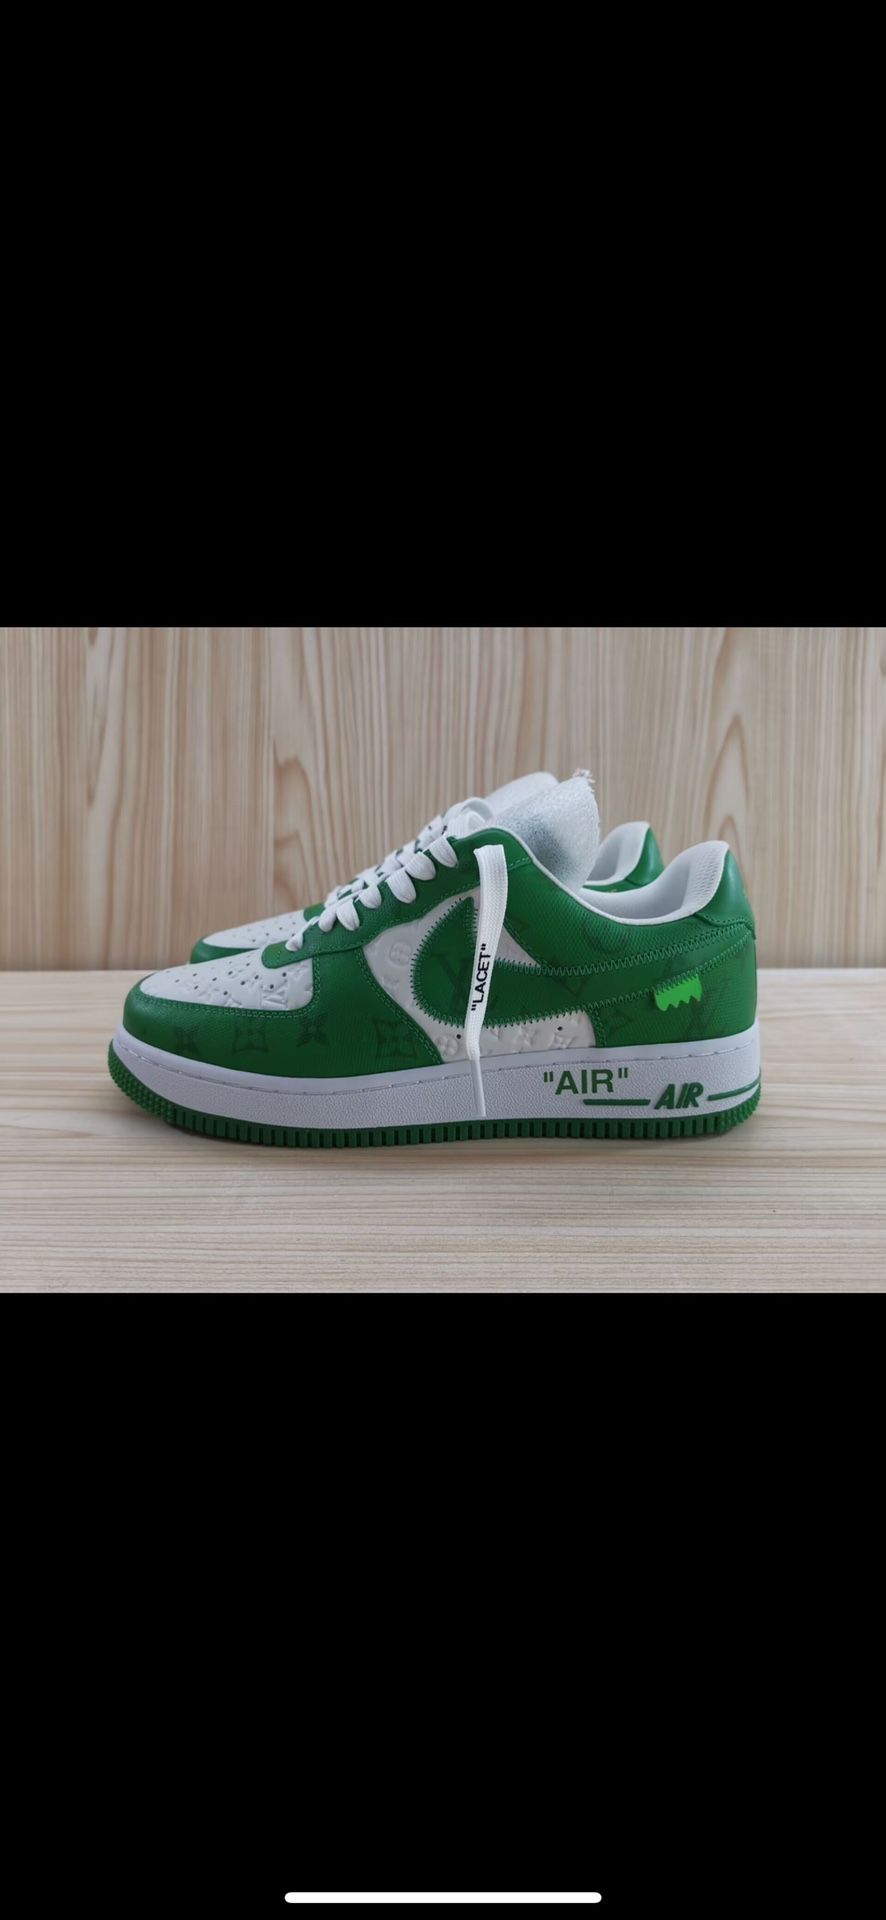 Louie Vuitton Air forces for Sale in Riverside, CA - OfferUp